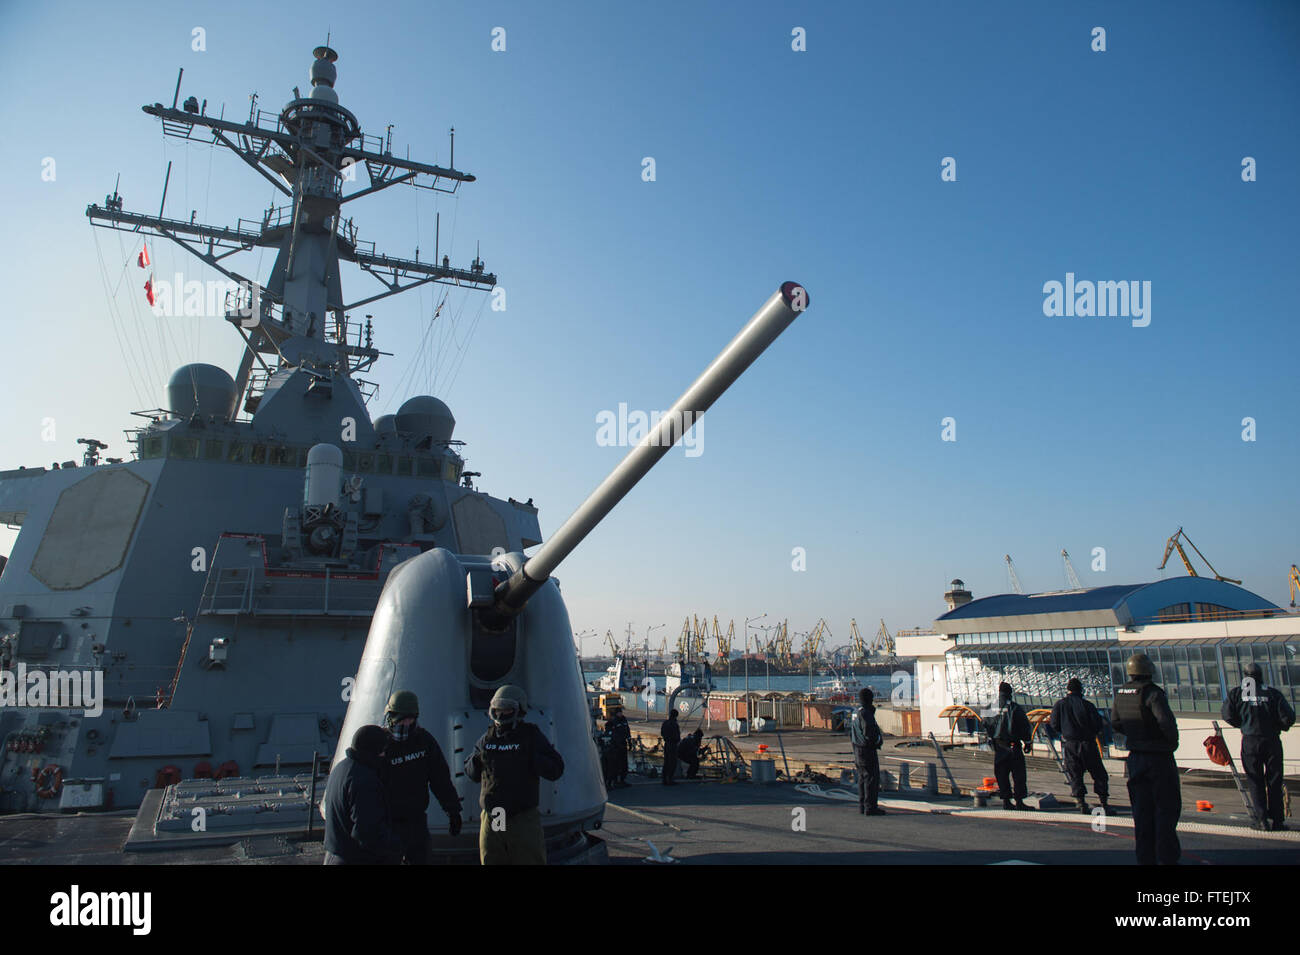 CONSTANTA, Romania (Dec. 30, 2014) USS Donald Cook (DDG 75) arrives at Constanta, Romania for a scheduled port visit Dec. 30, 2014. Donald Cook, an Arleigh Burke-class guided-missile destroyer, forward-deployed to Rota, Spain, is conducting naval operations in the U.S. 6th Fleet area of operations in support of U.S. national security interests in Europe. Stock Photo